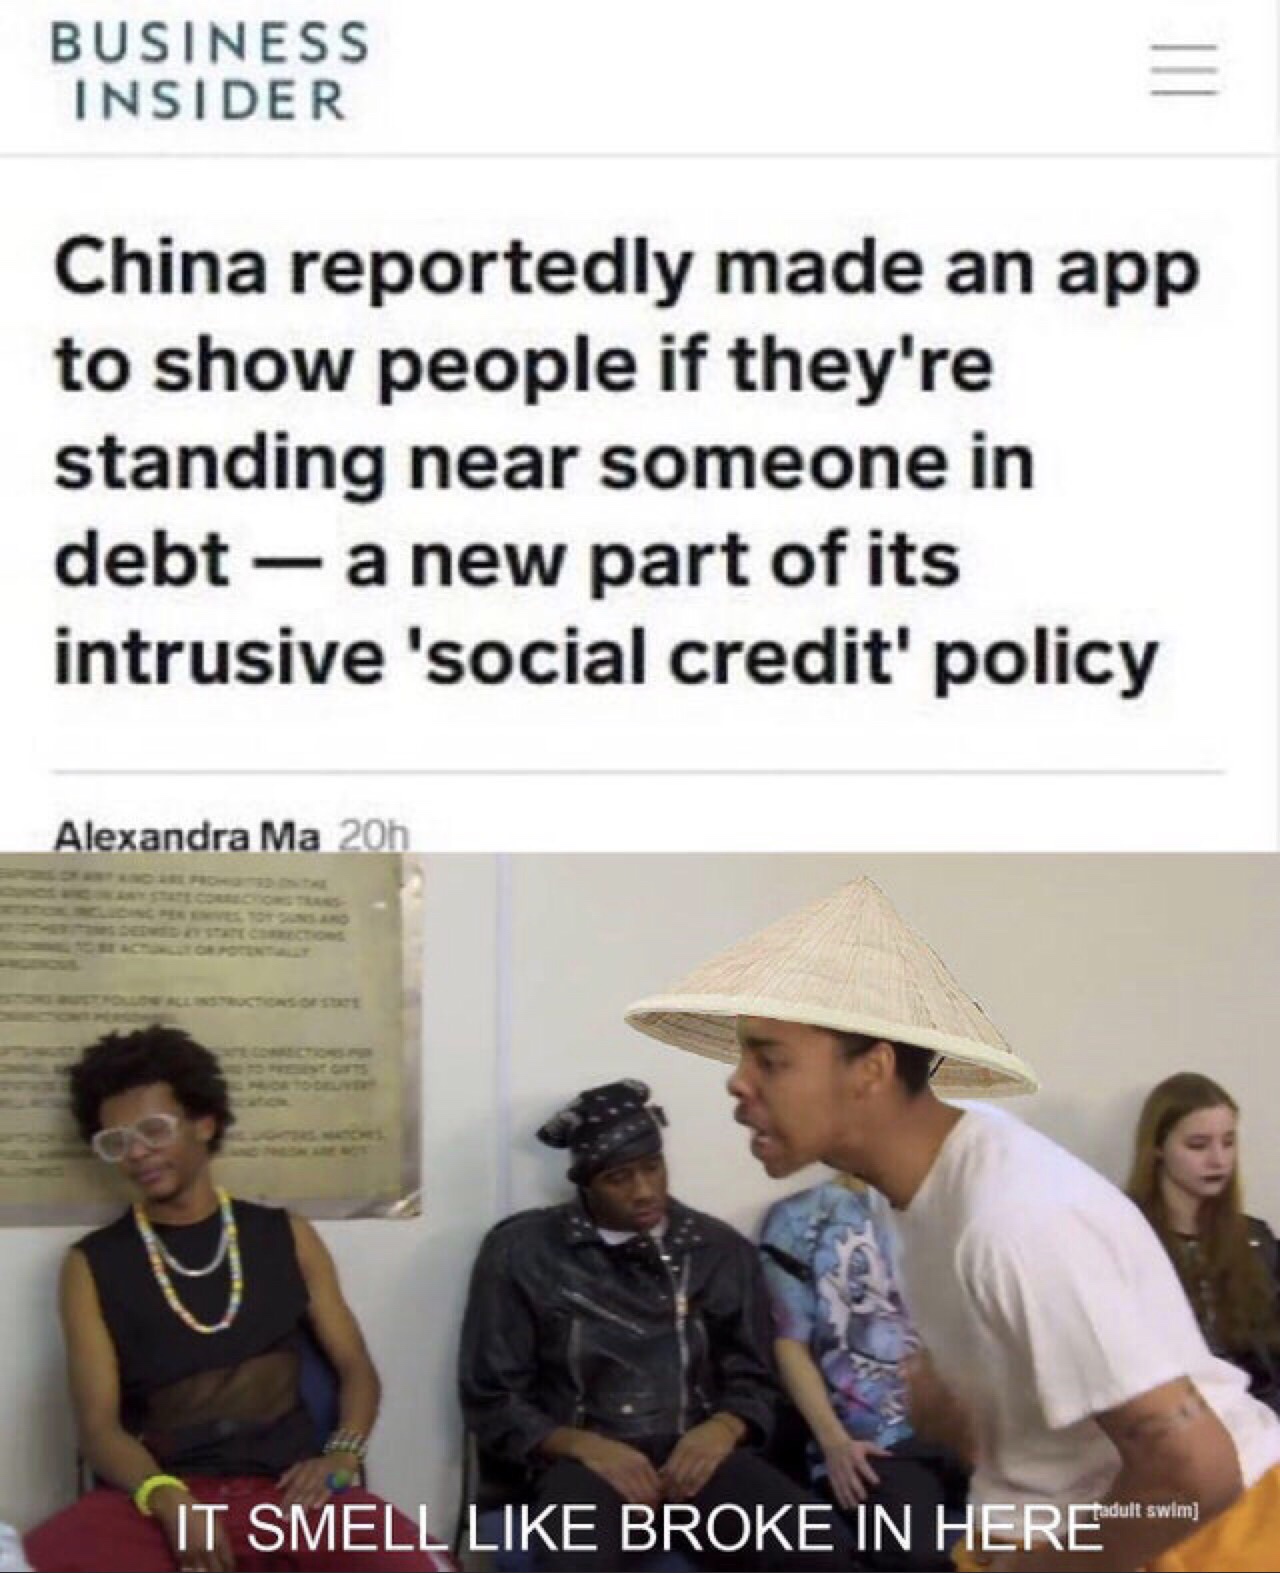 airpod meme - Business Insider China reportedly made an app to show people if they're standing near someone in debt a new part of its intrusive 'social credit' policy Alexandra Ma 20h It Smell Broke In Here swim